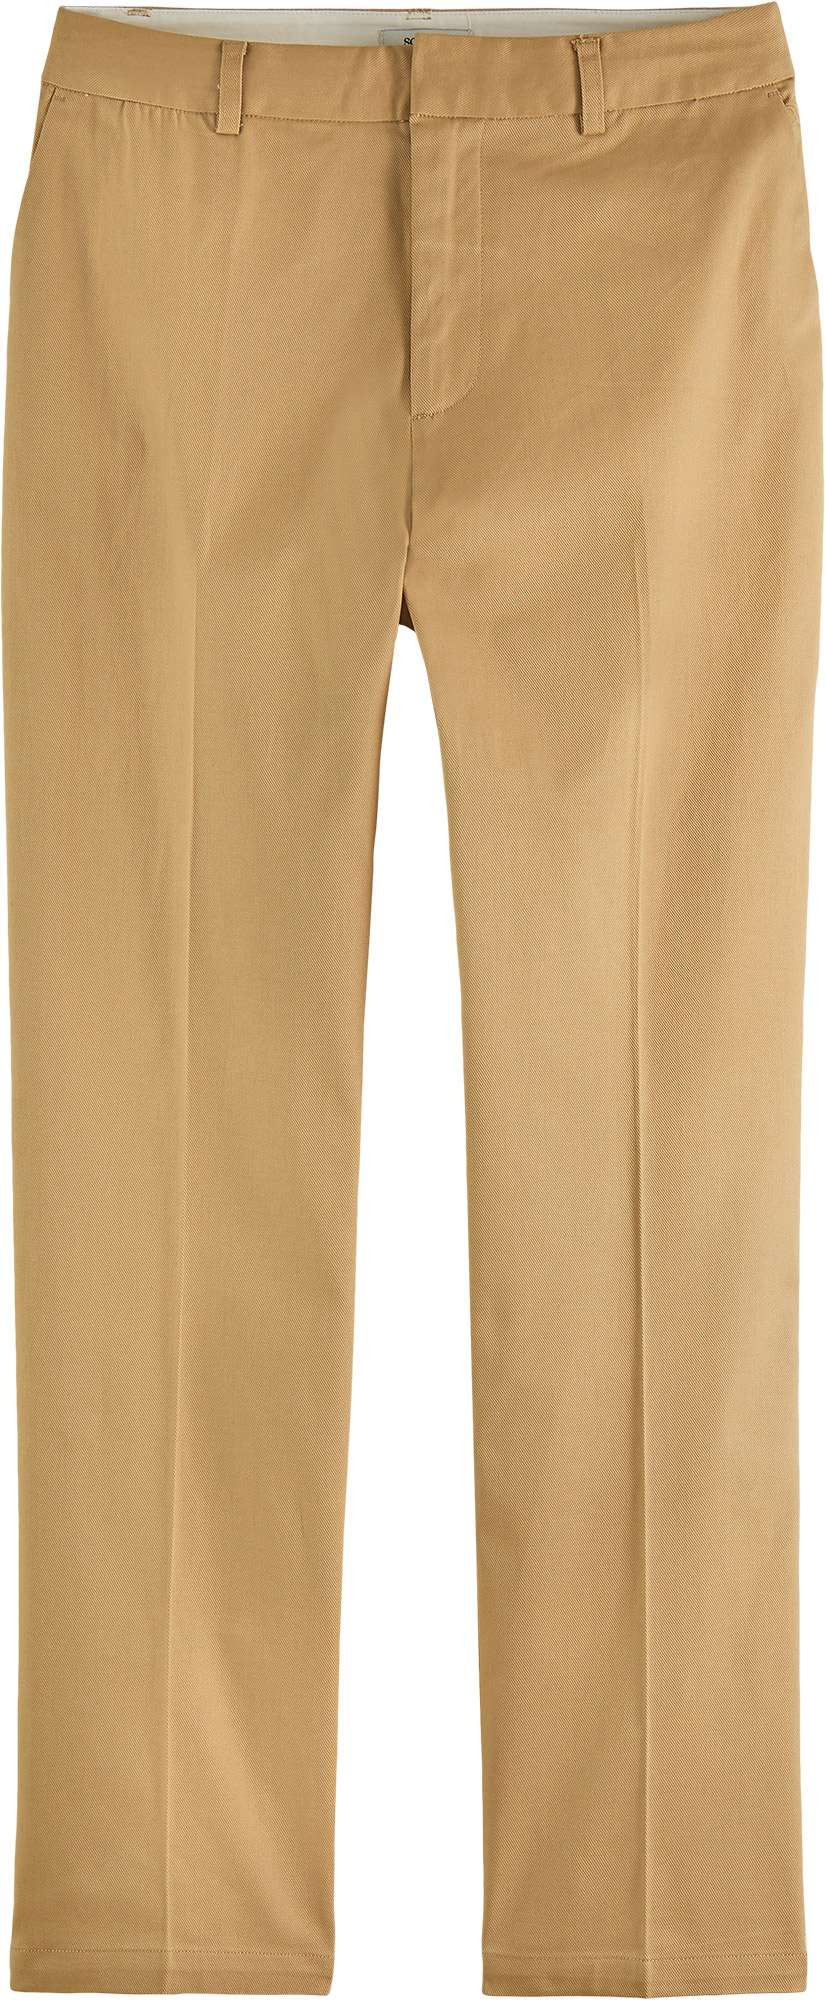 Afbeelding van Scotch & Soda Abott mid rise tapered chino in o sand